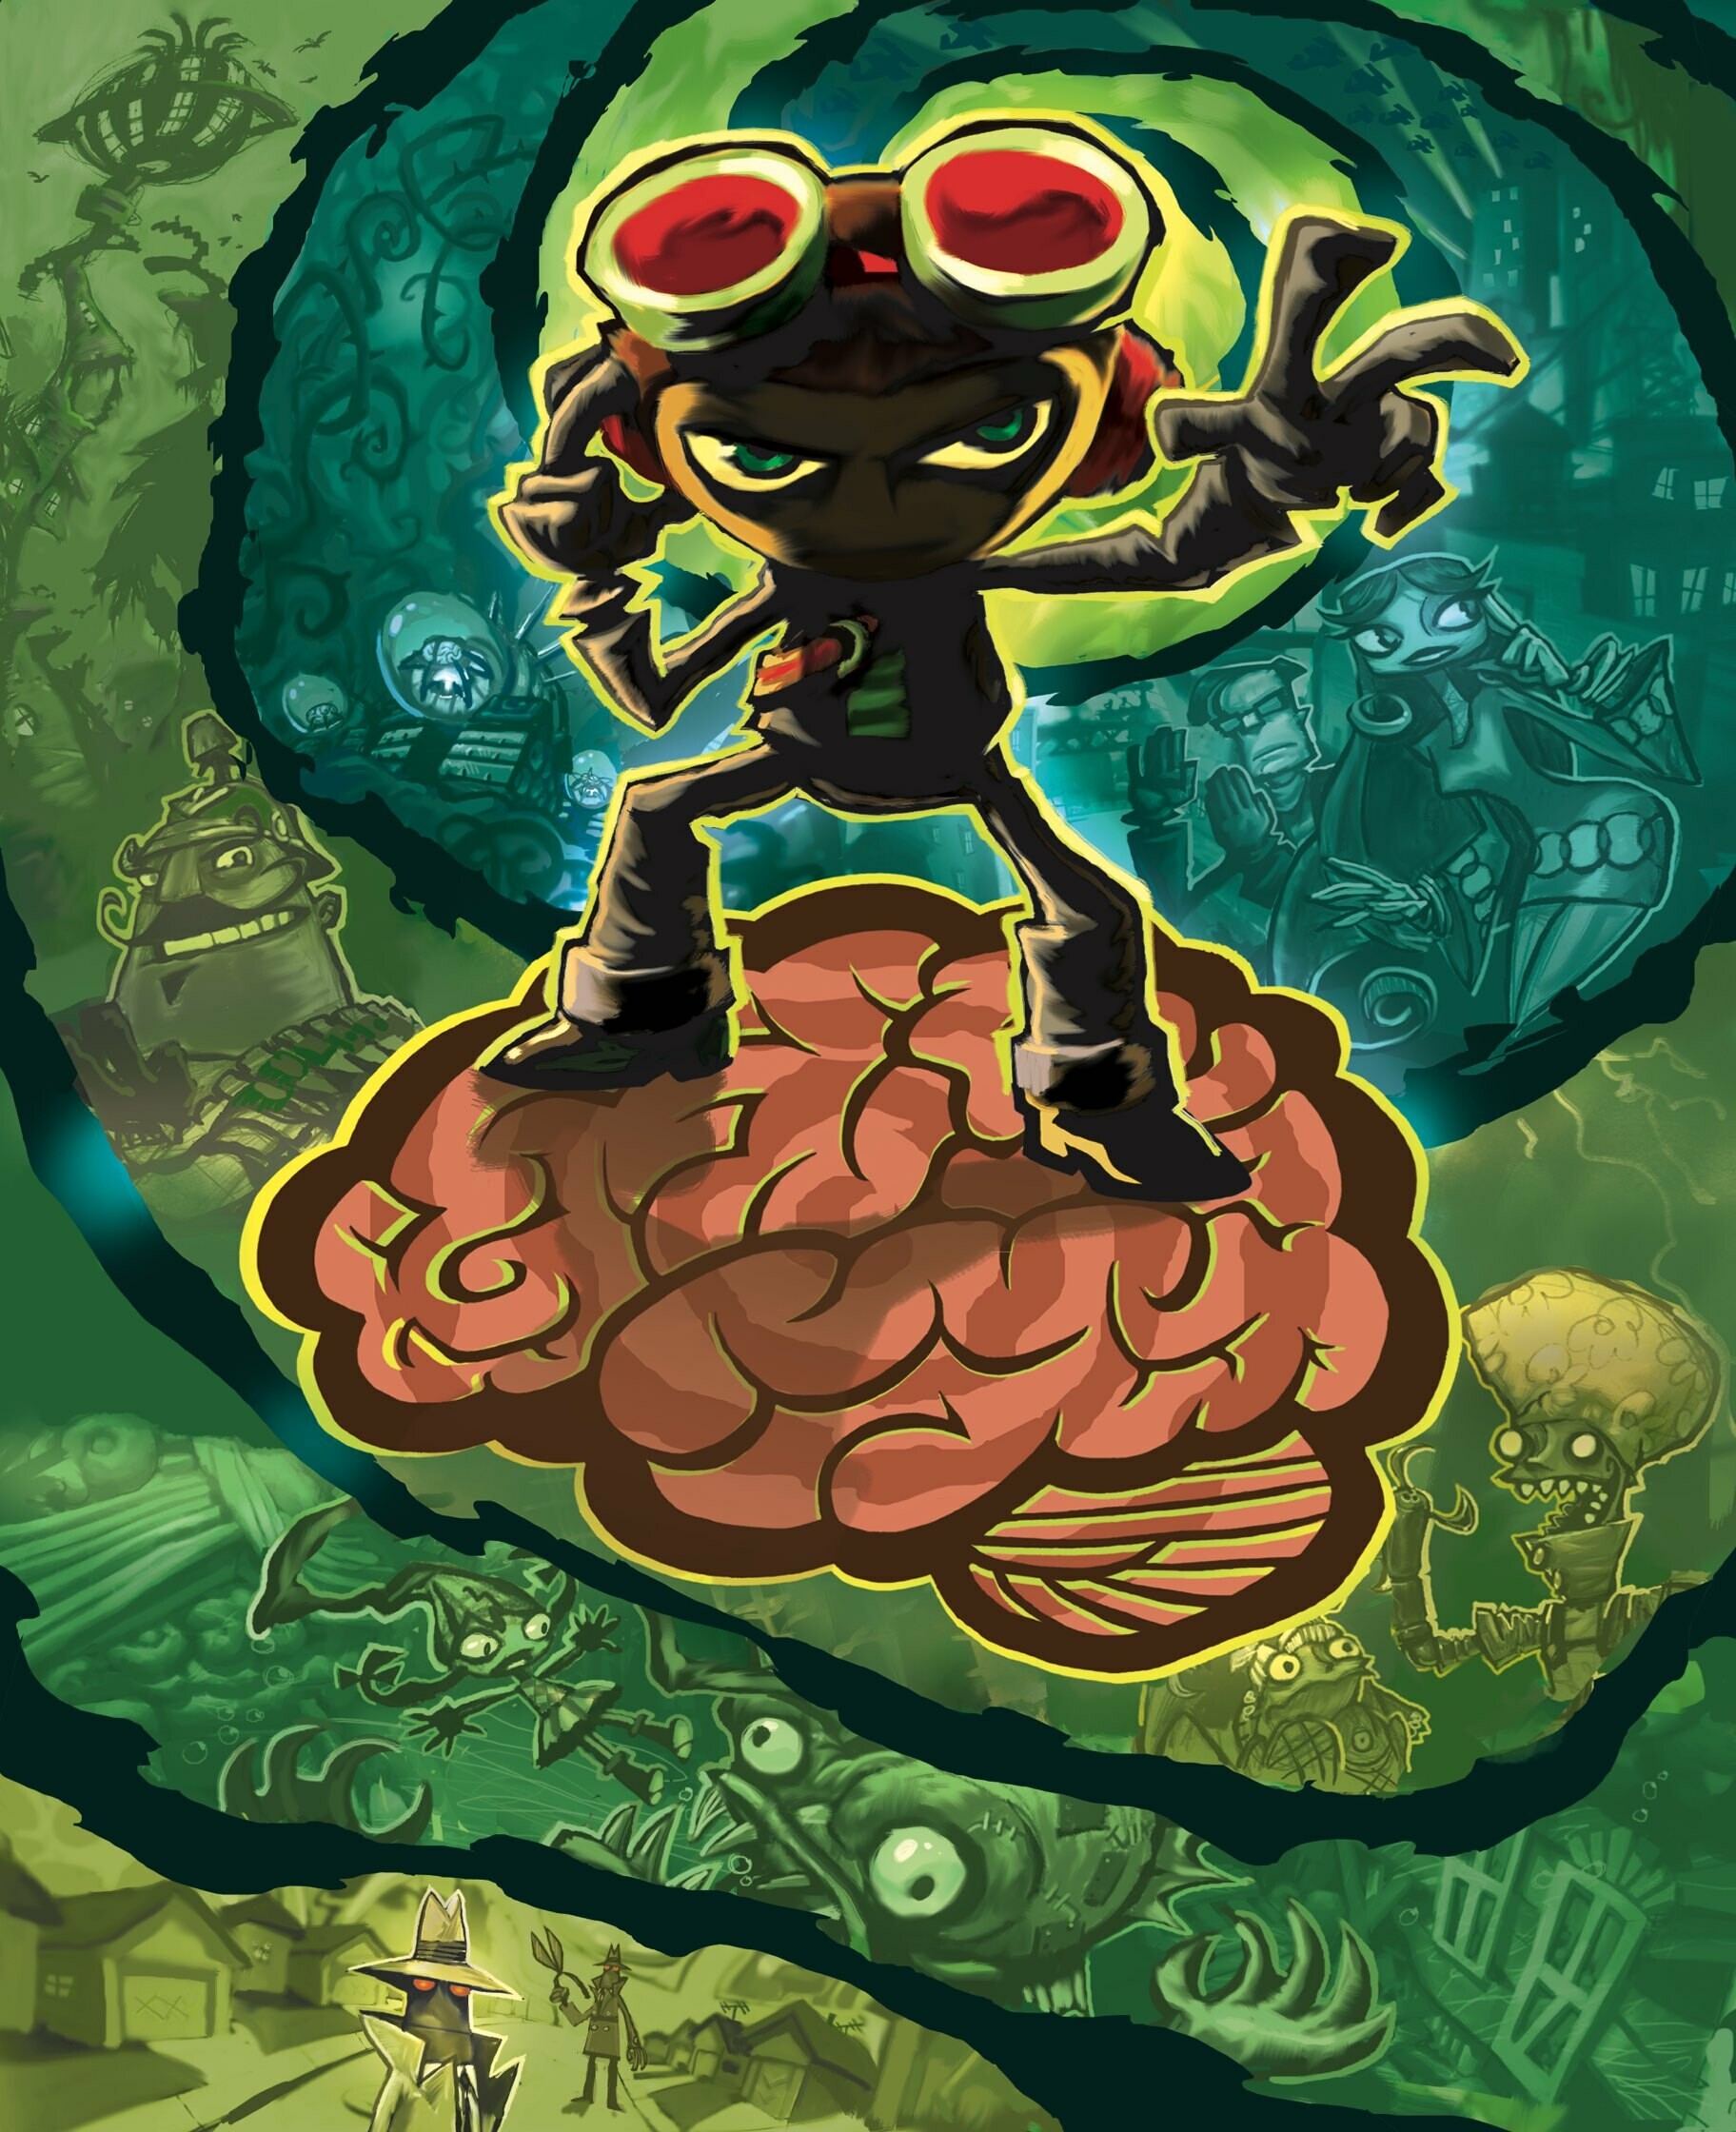 HD wallpaper, Now On Game Pass, 1830X2240 Hd Phone, Mobile Hd Psychonauts 2 Wallpaper Image, Xbox Game Pass, Psychonauts 2, Double Fine Productions